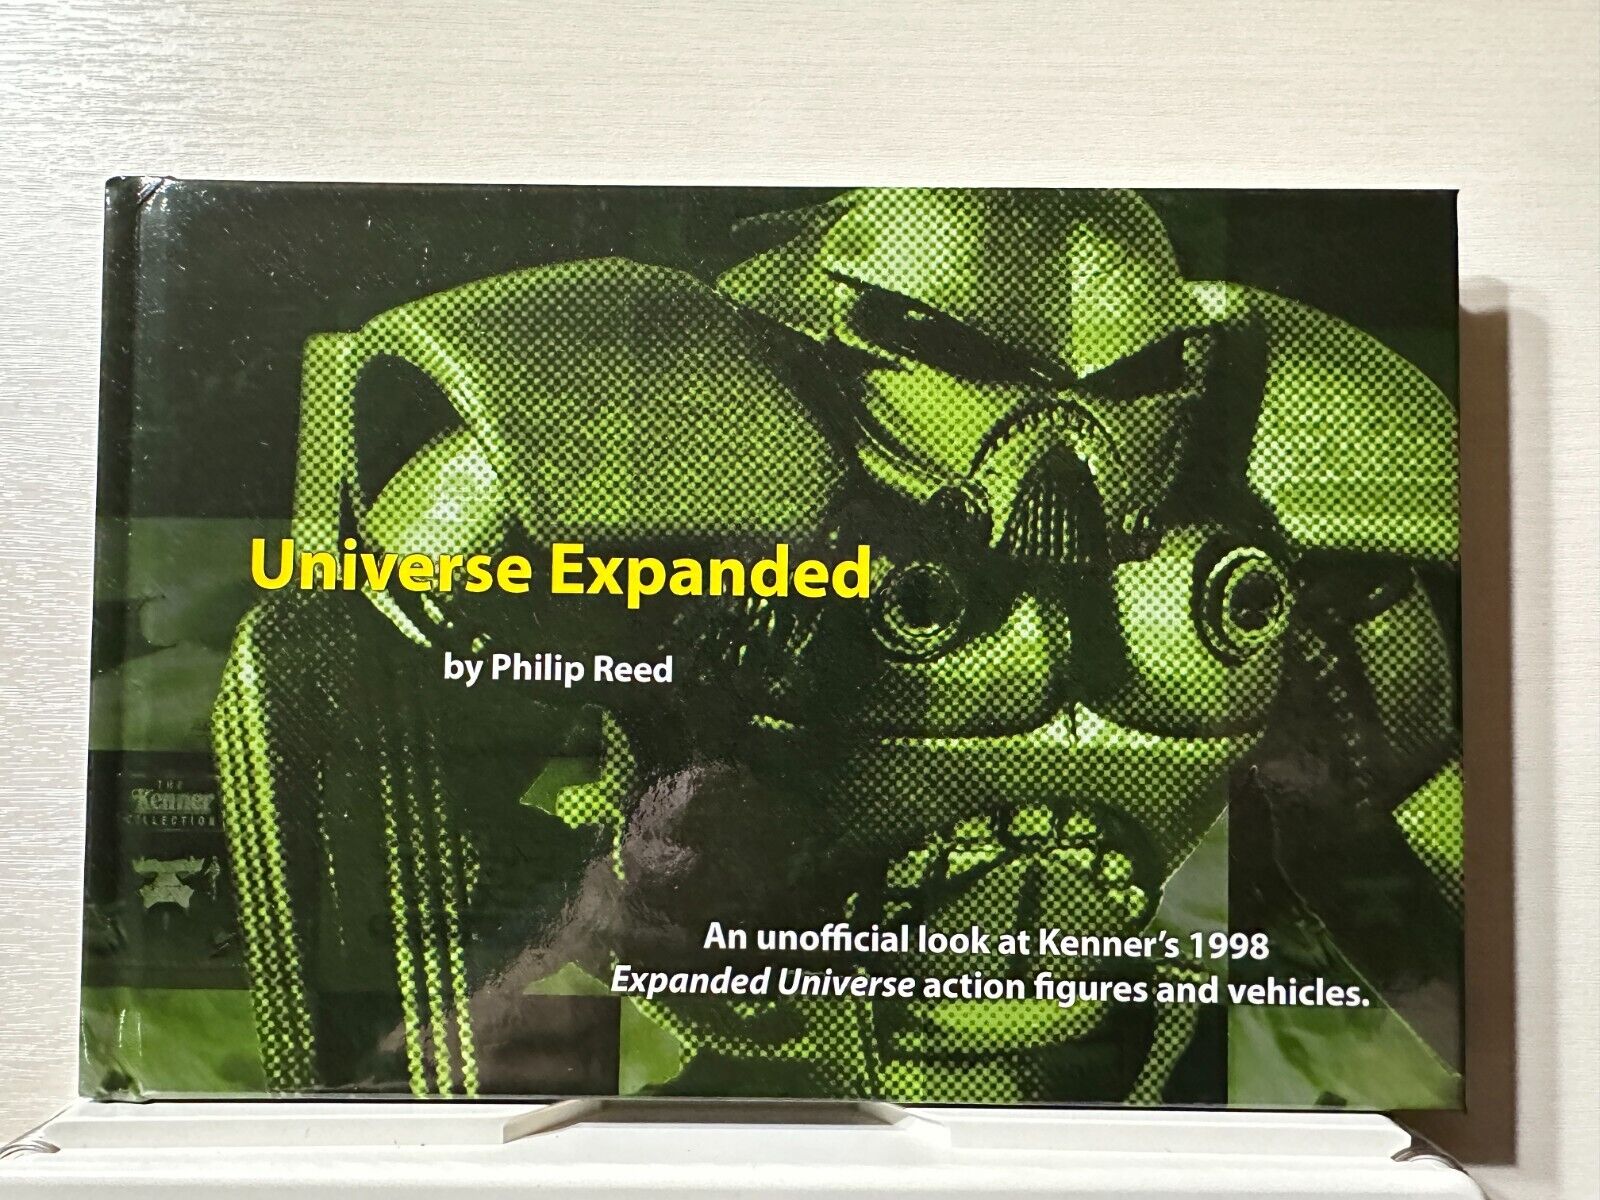 Kenner Star Wars Book - Universe Expanded by Philip Reed